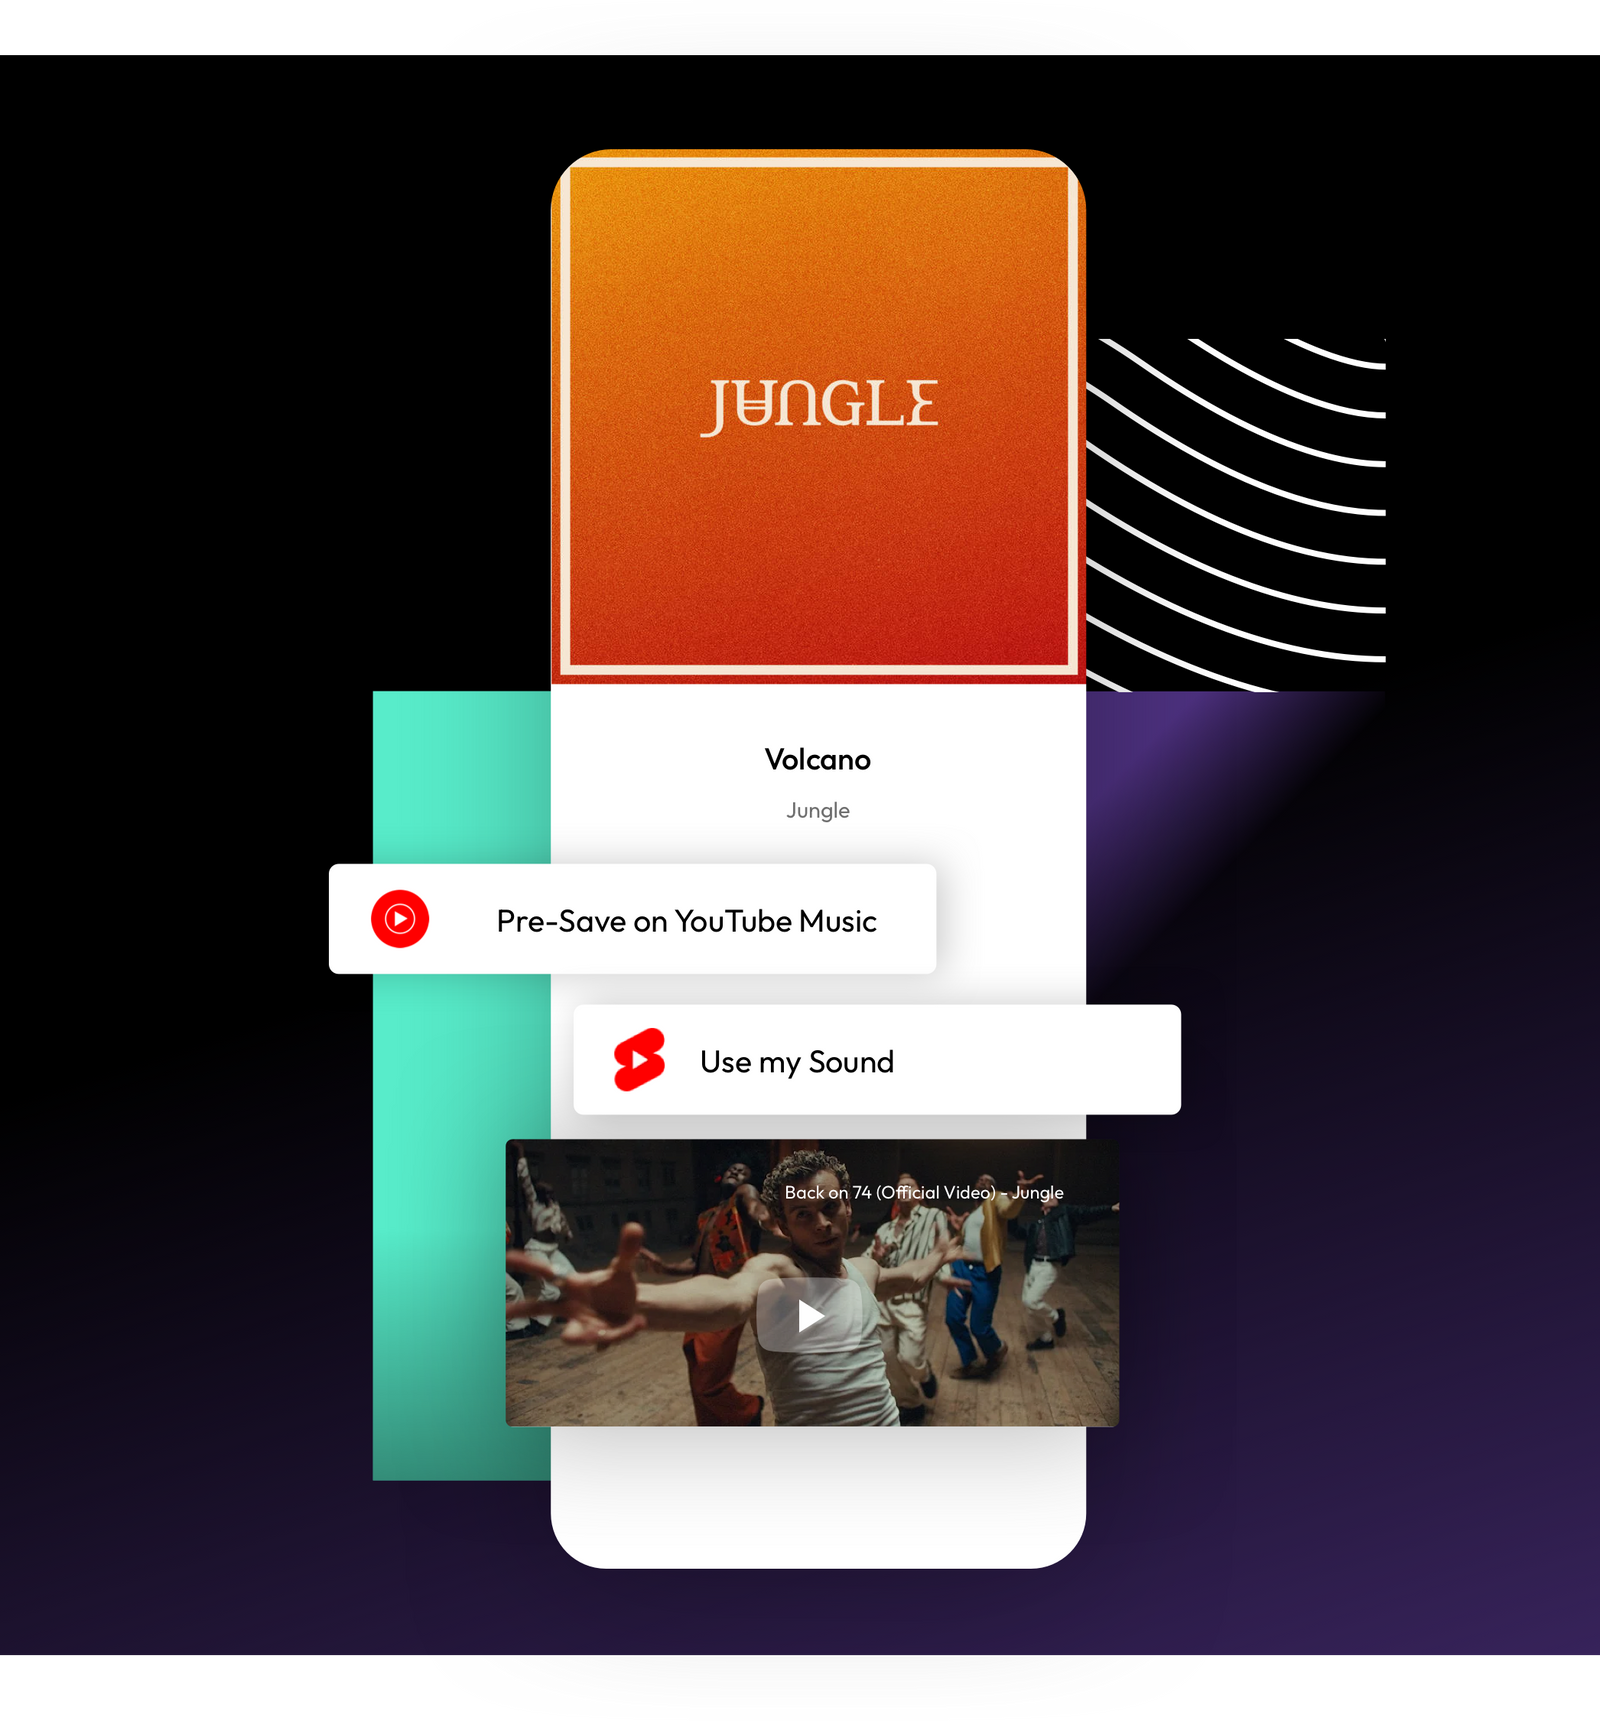 Introducing Feature.fm's YouTube Music Pre-Save that Automatically Grows Your Channel Subscribers